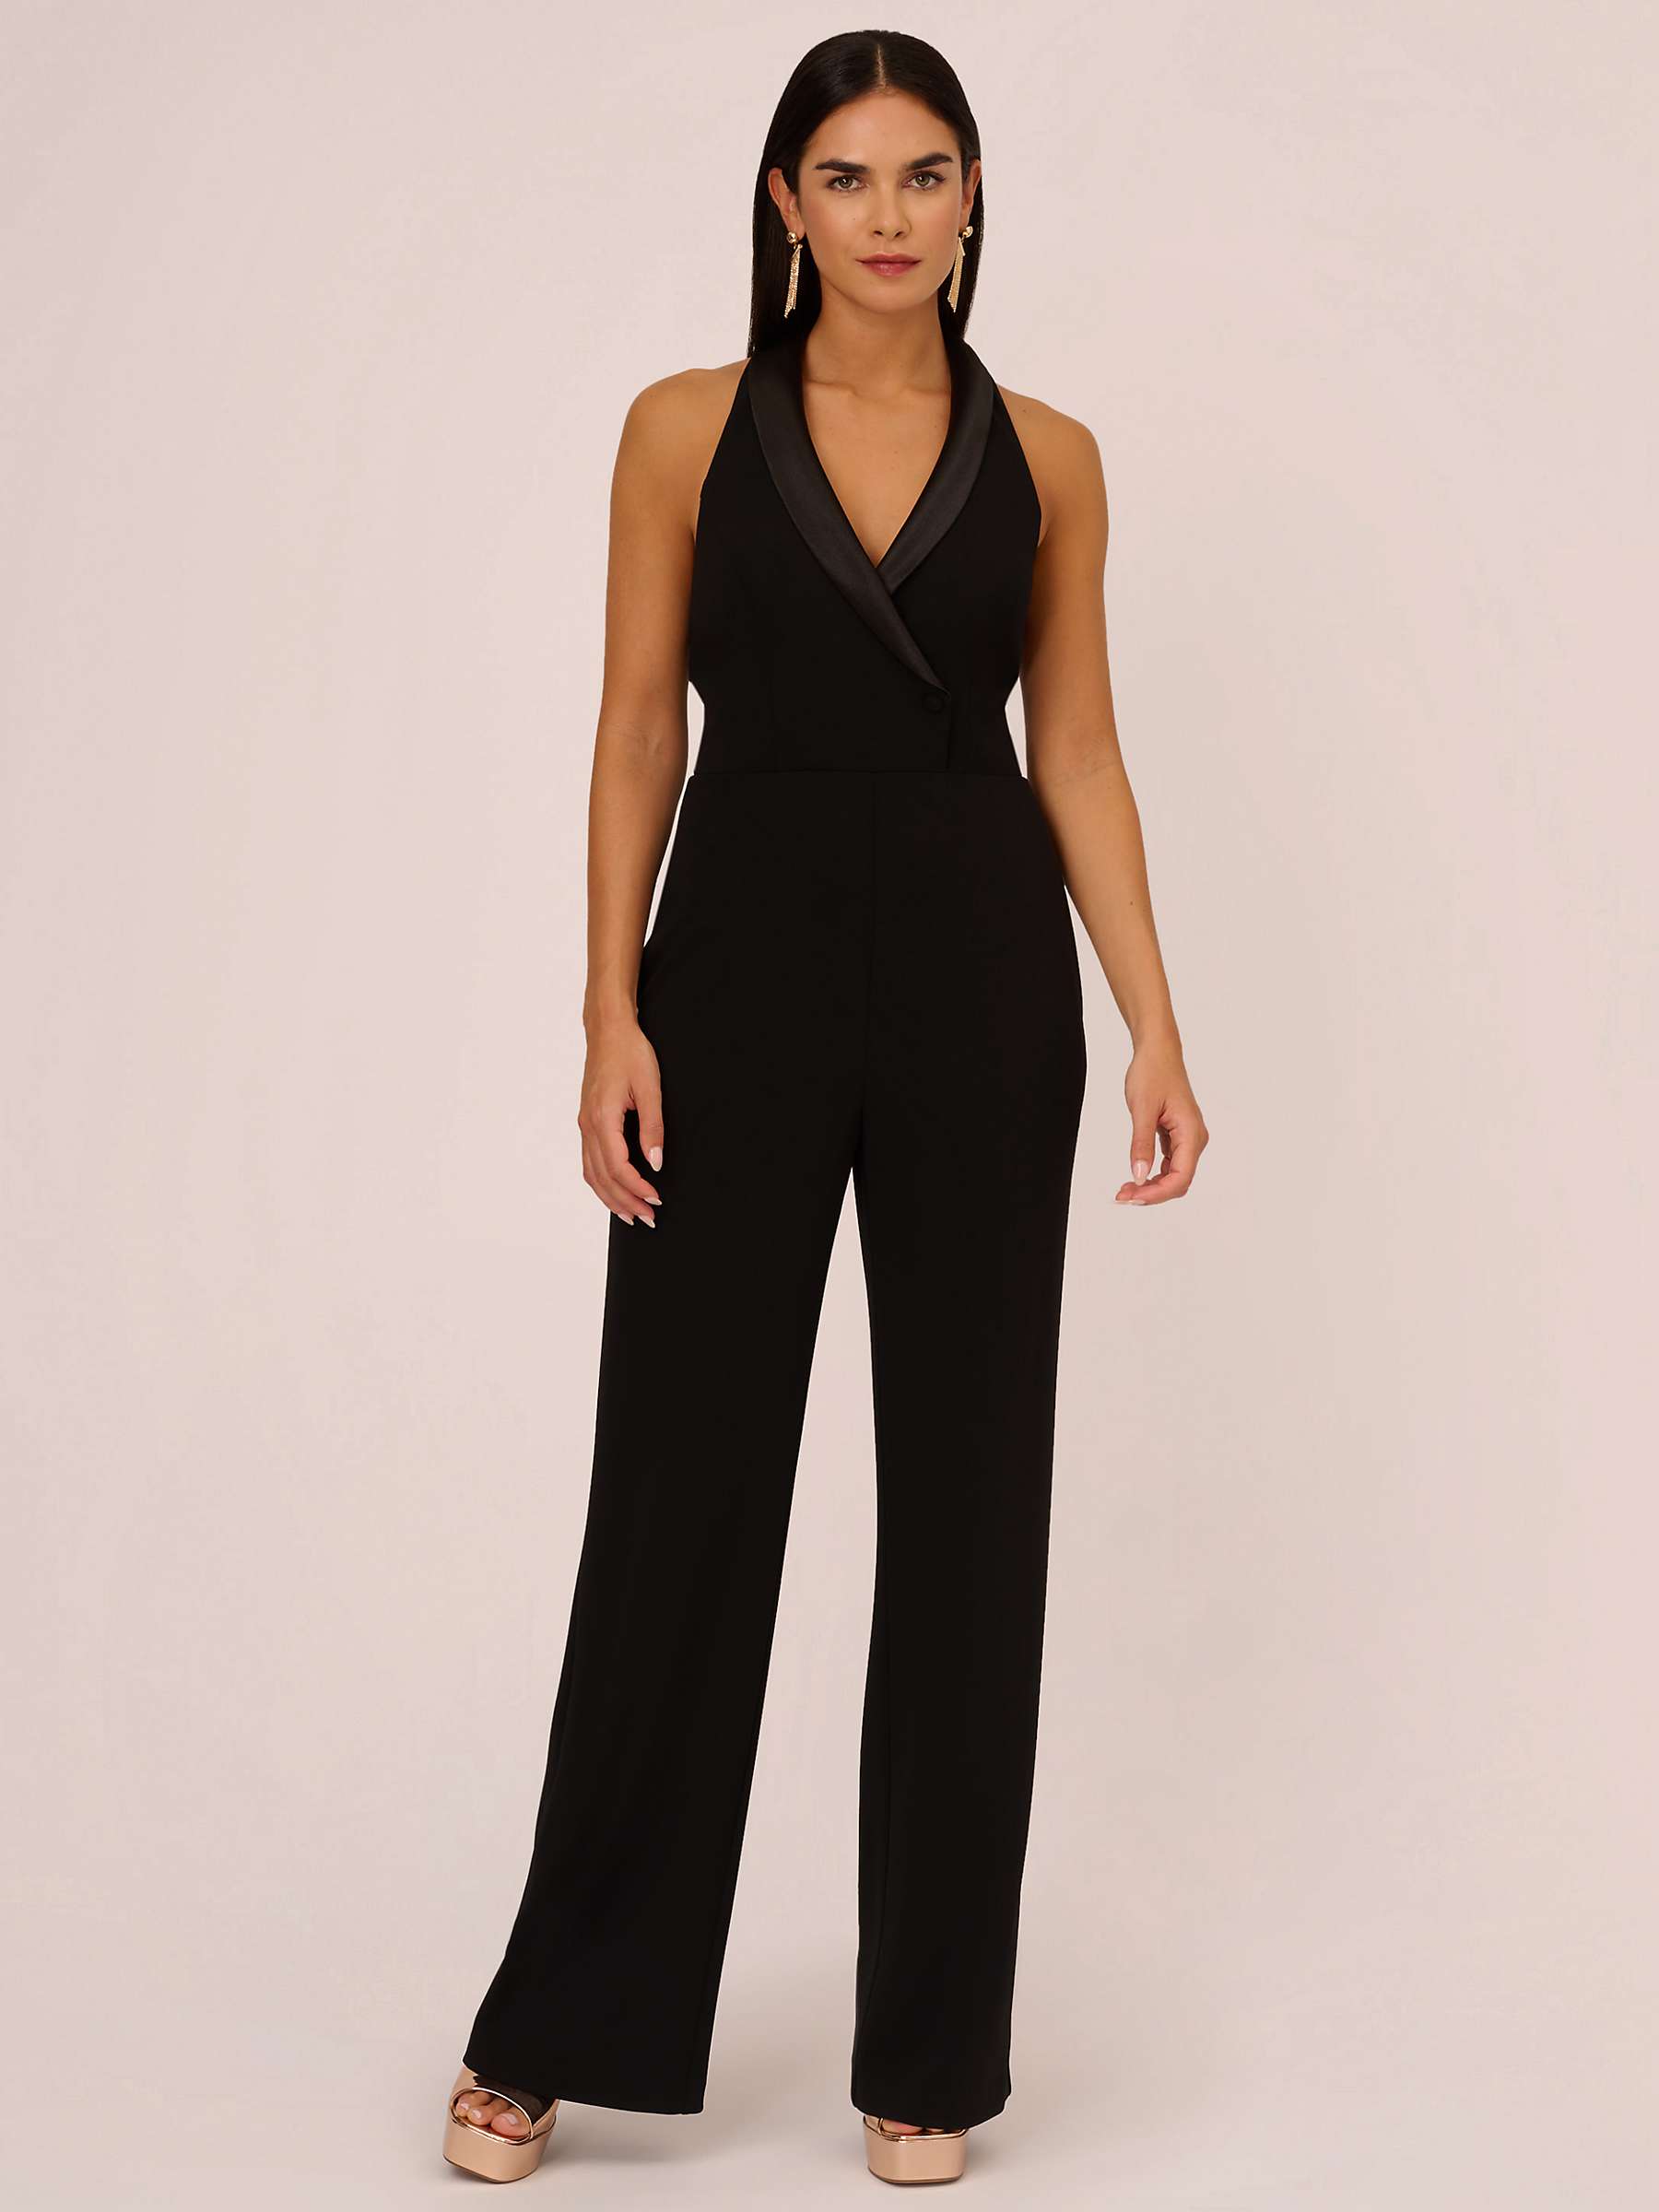 Buy Aidan by Adrianna Papell Tuxedo Crepe Jumpsuit, Black Online at johnlewis.com